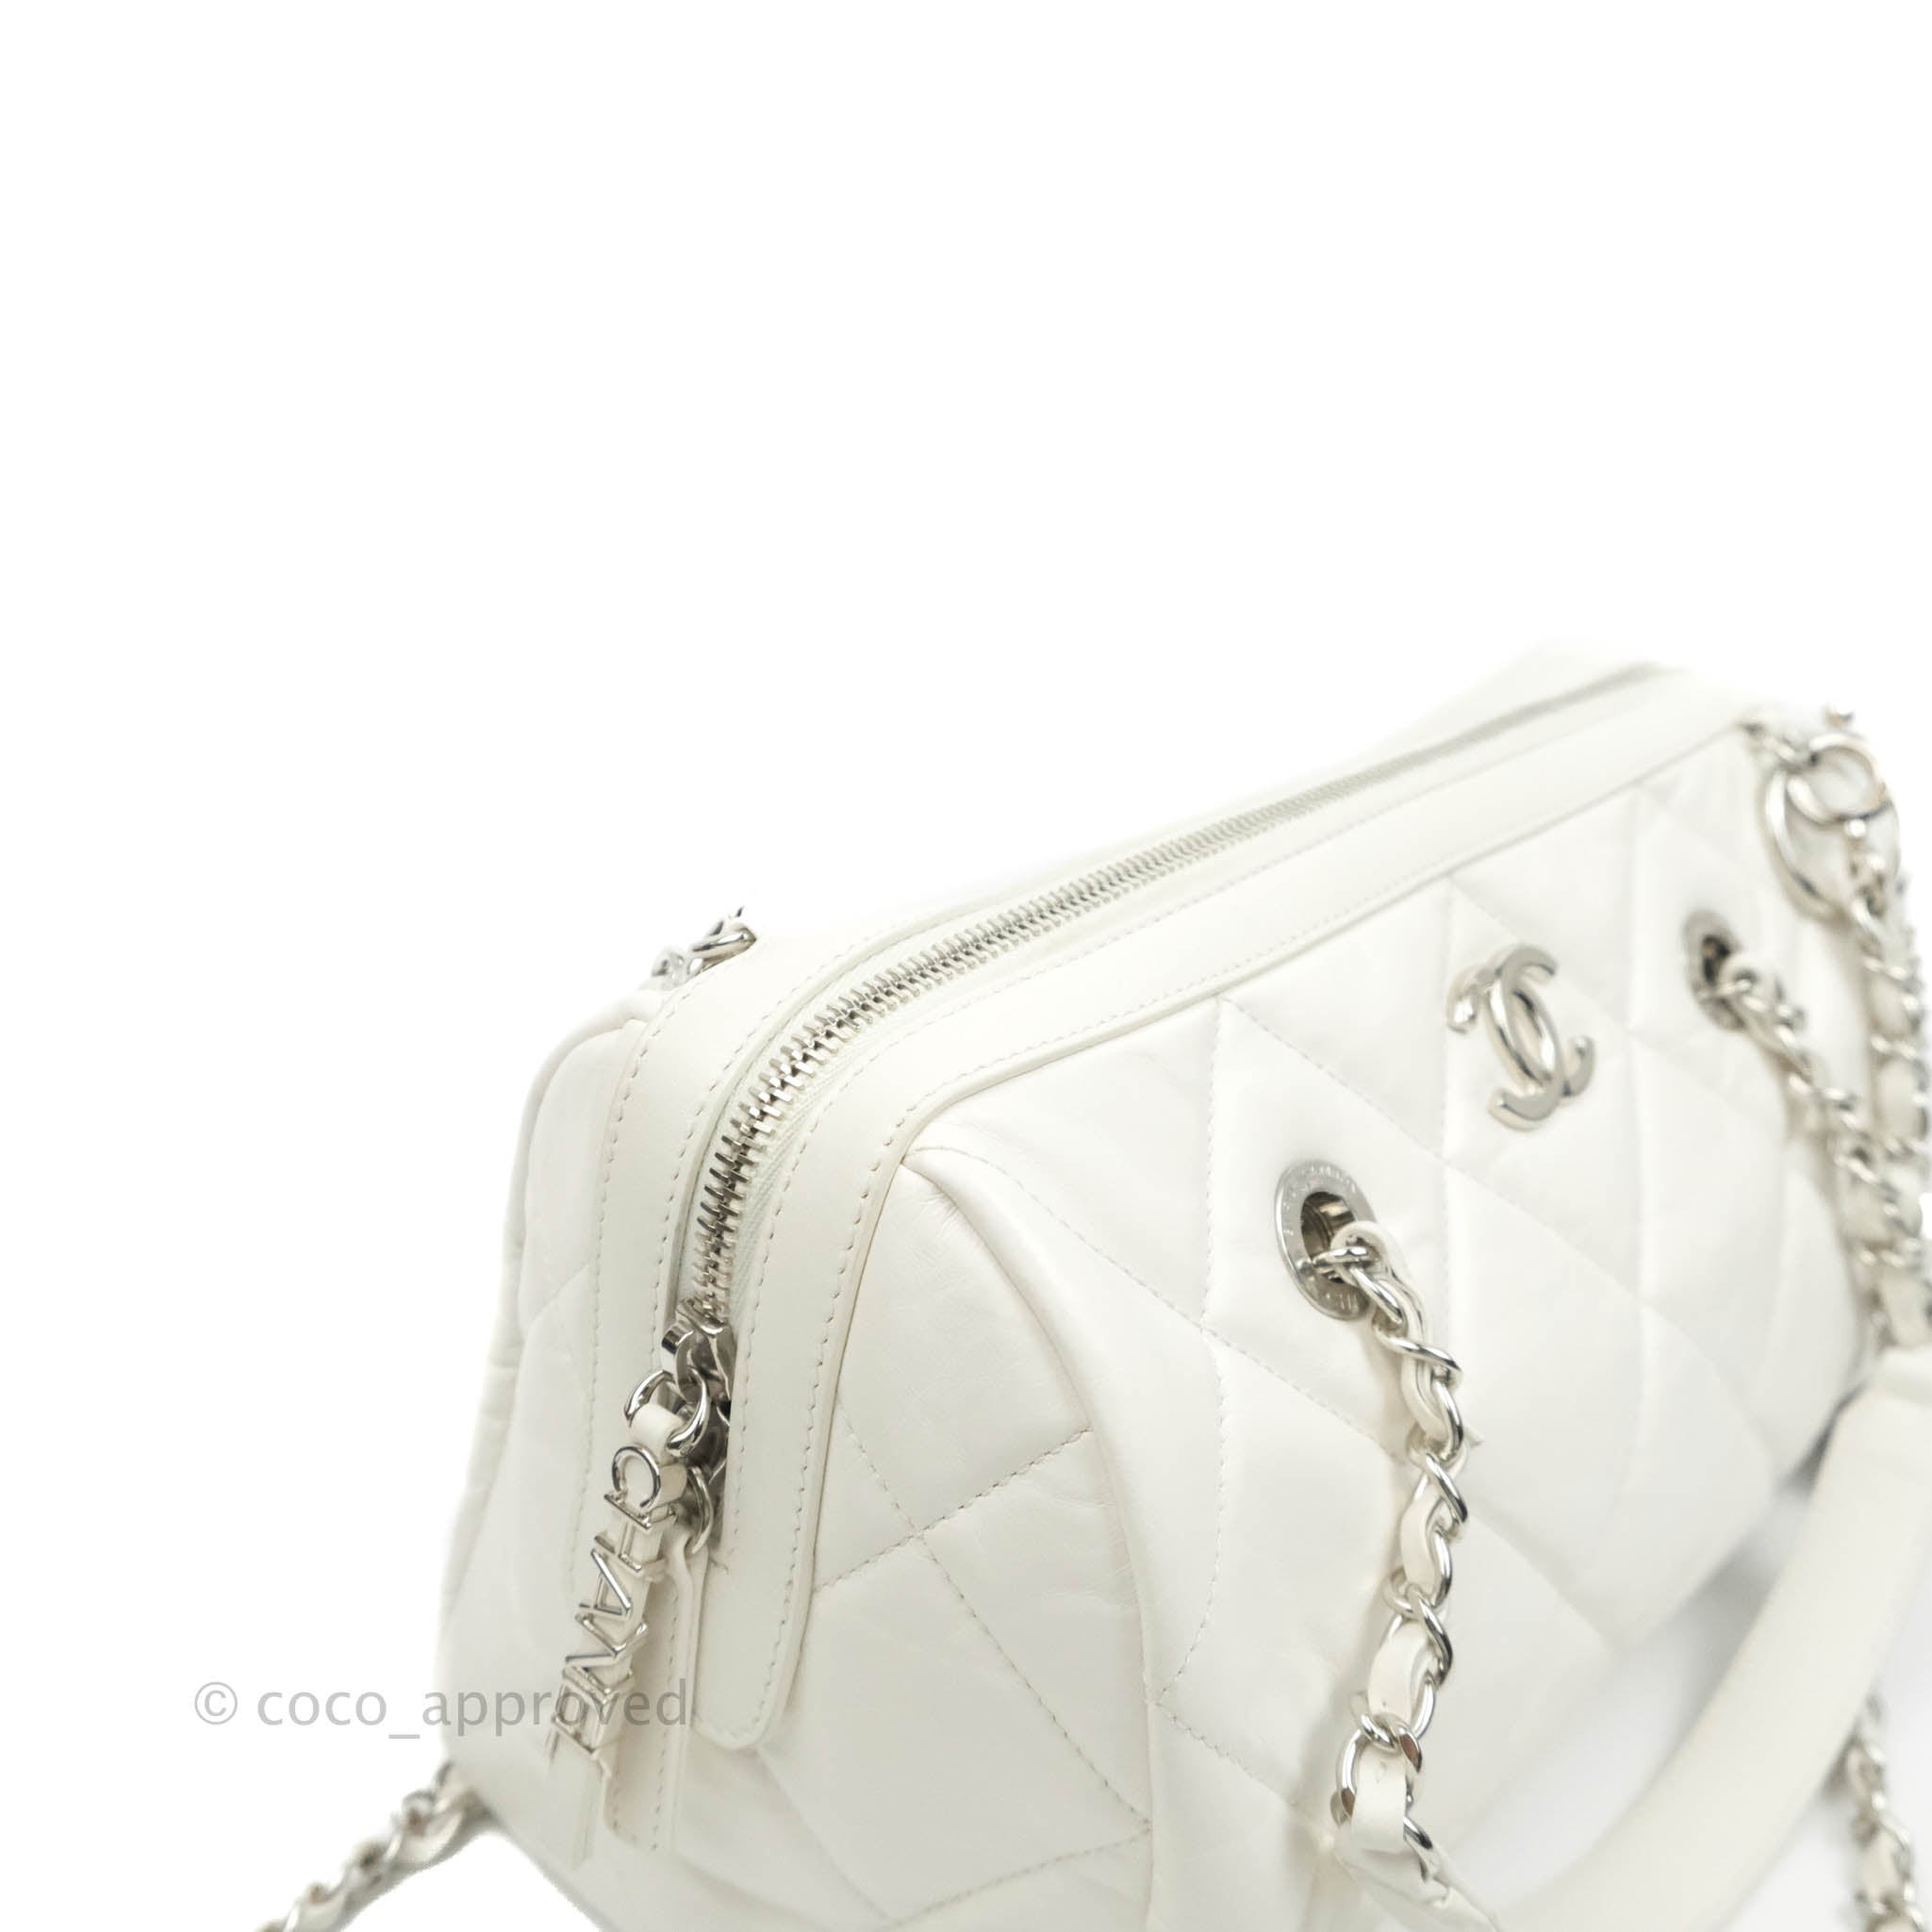 CHANEL Calfskin Quilted Small CC Bowling Bag White 927264